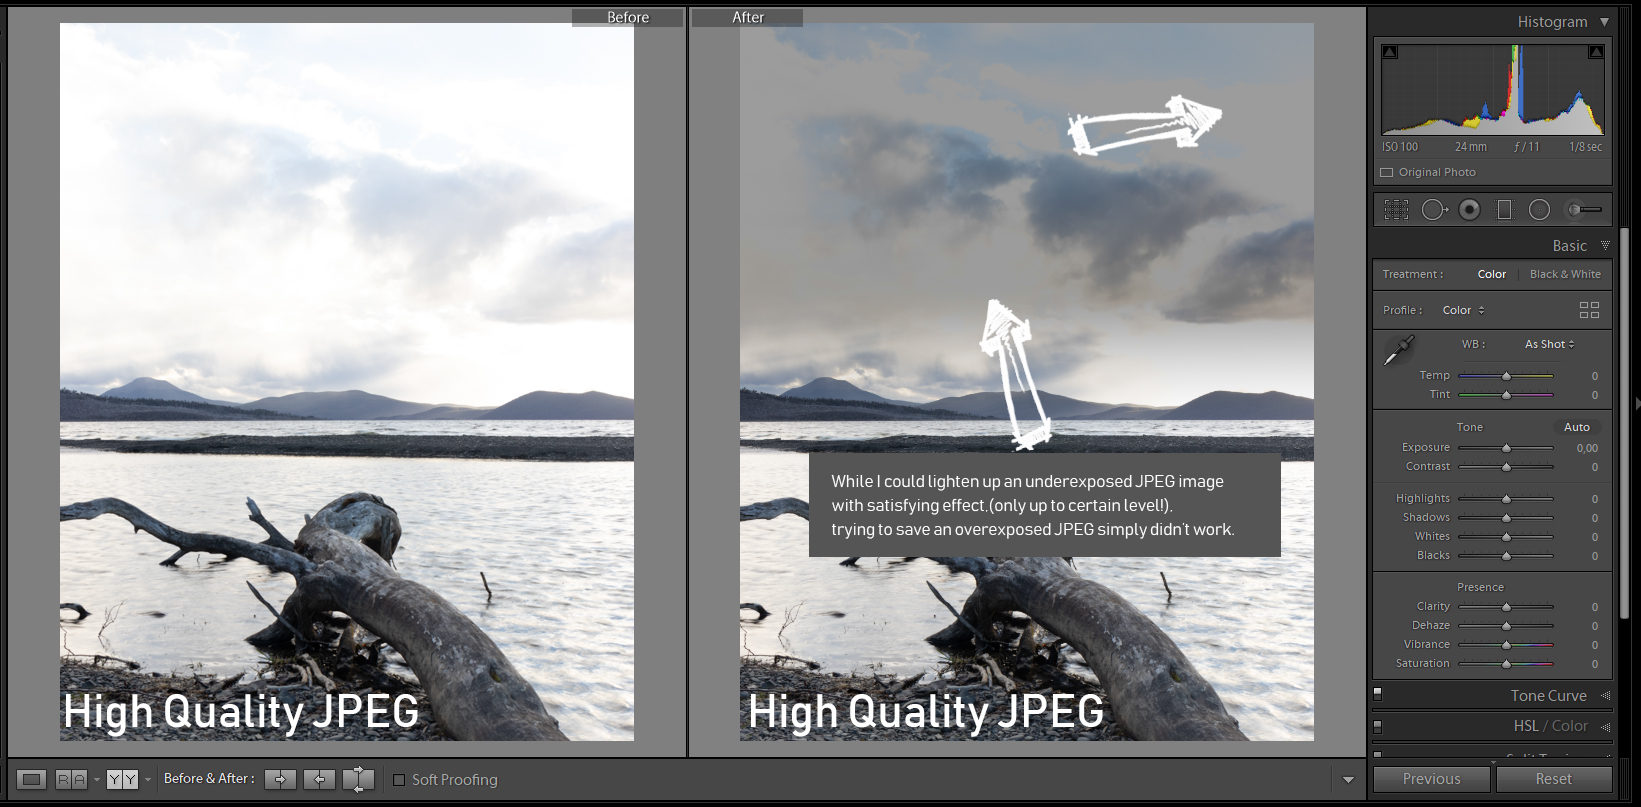 Performance of JPEG in the exact same edit proves how powerful the RAW file actually is. You cannot recover any details in the sky, only sort of darken it which looks very awkward and 'muddy'.